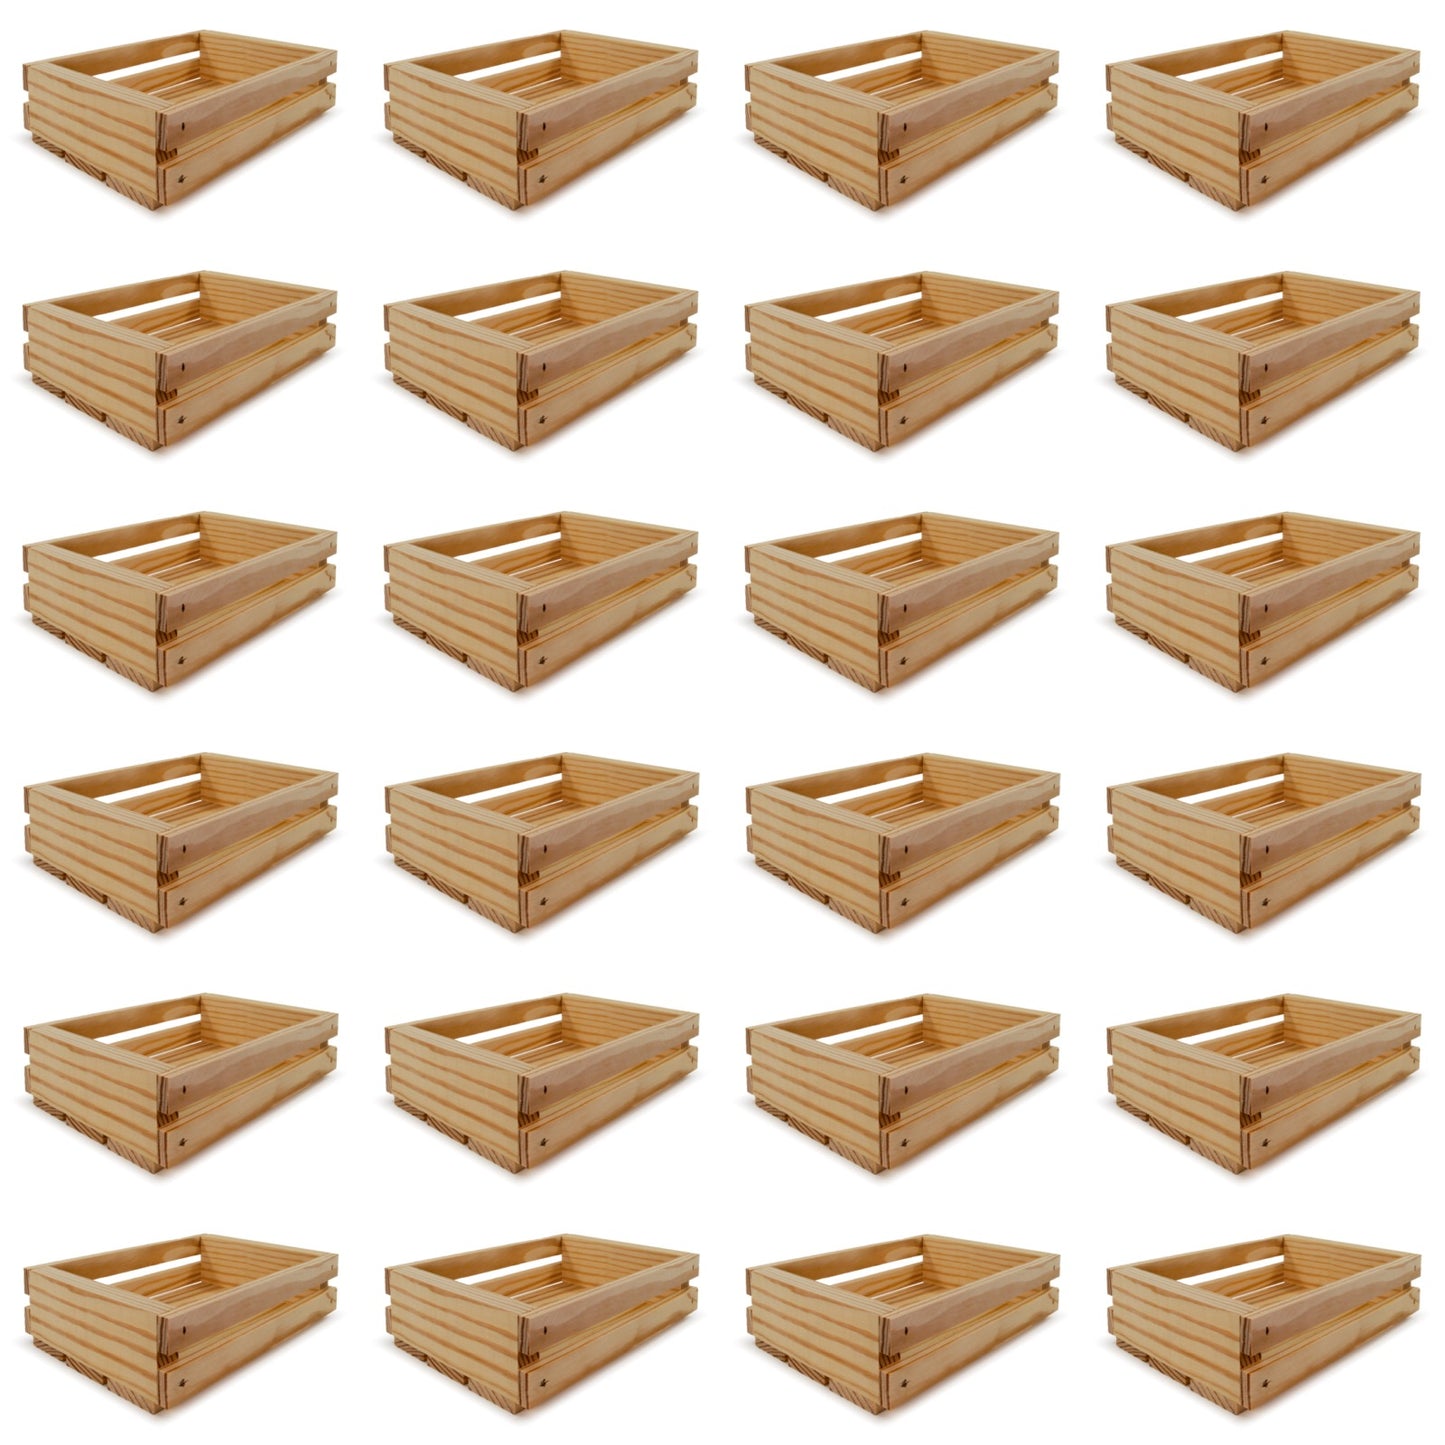 24 Small wooden crates 8x6x2.5